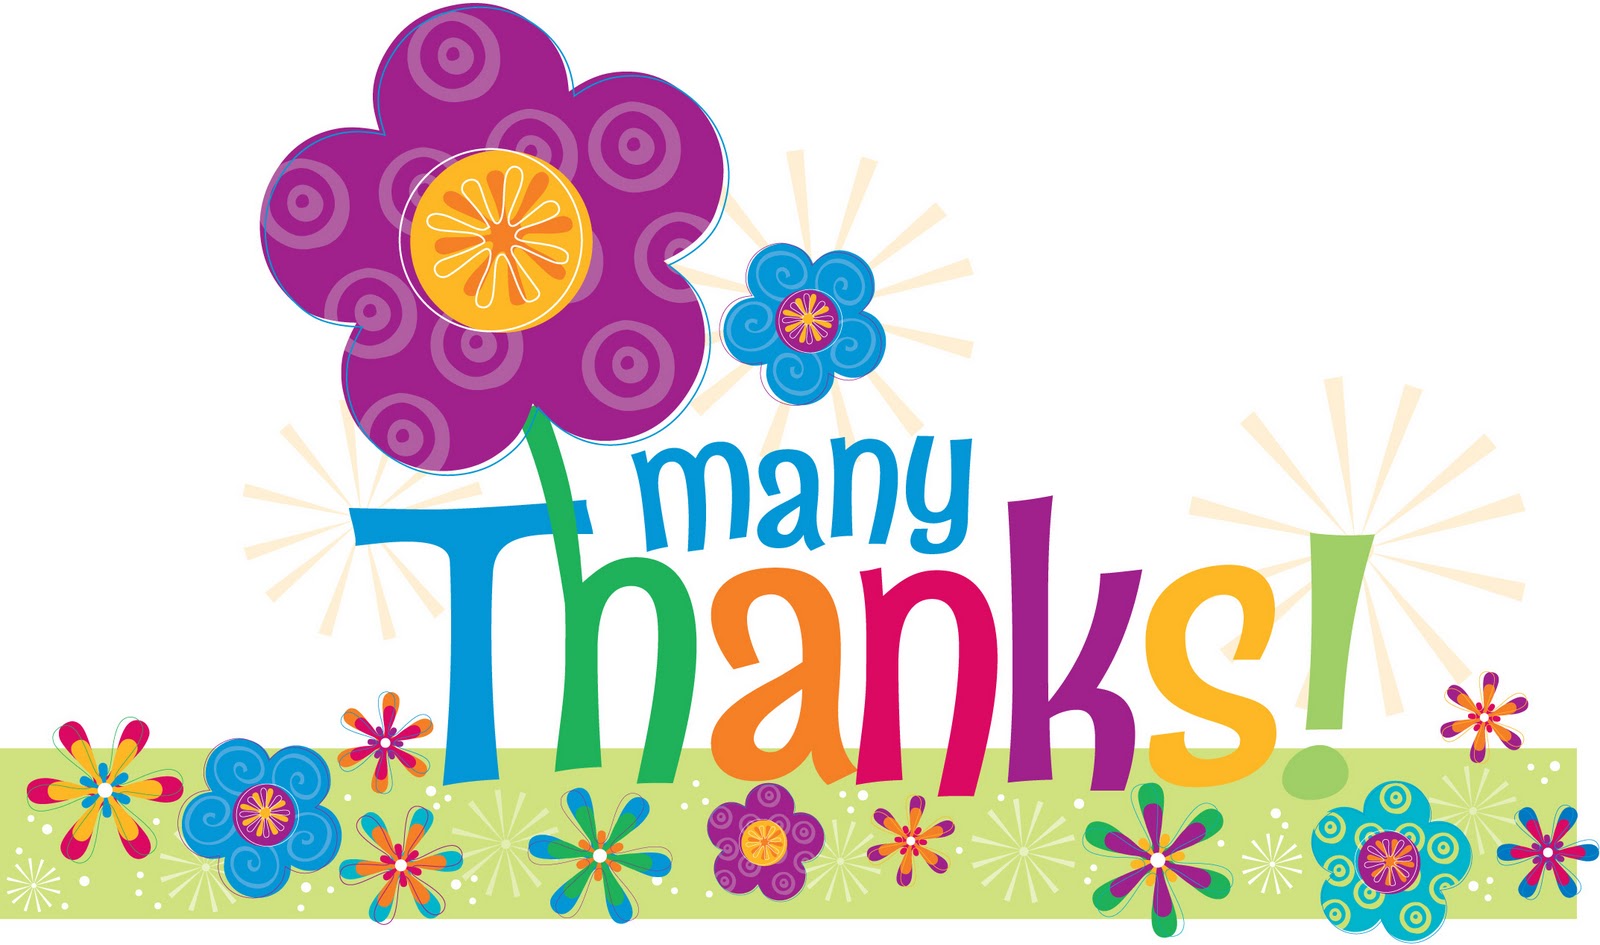 Thank you clipart 4 - Thank You Clipart